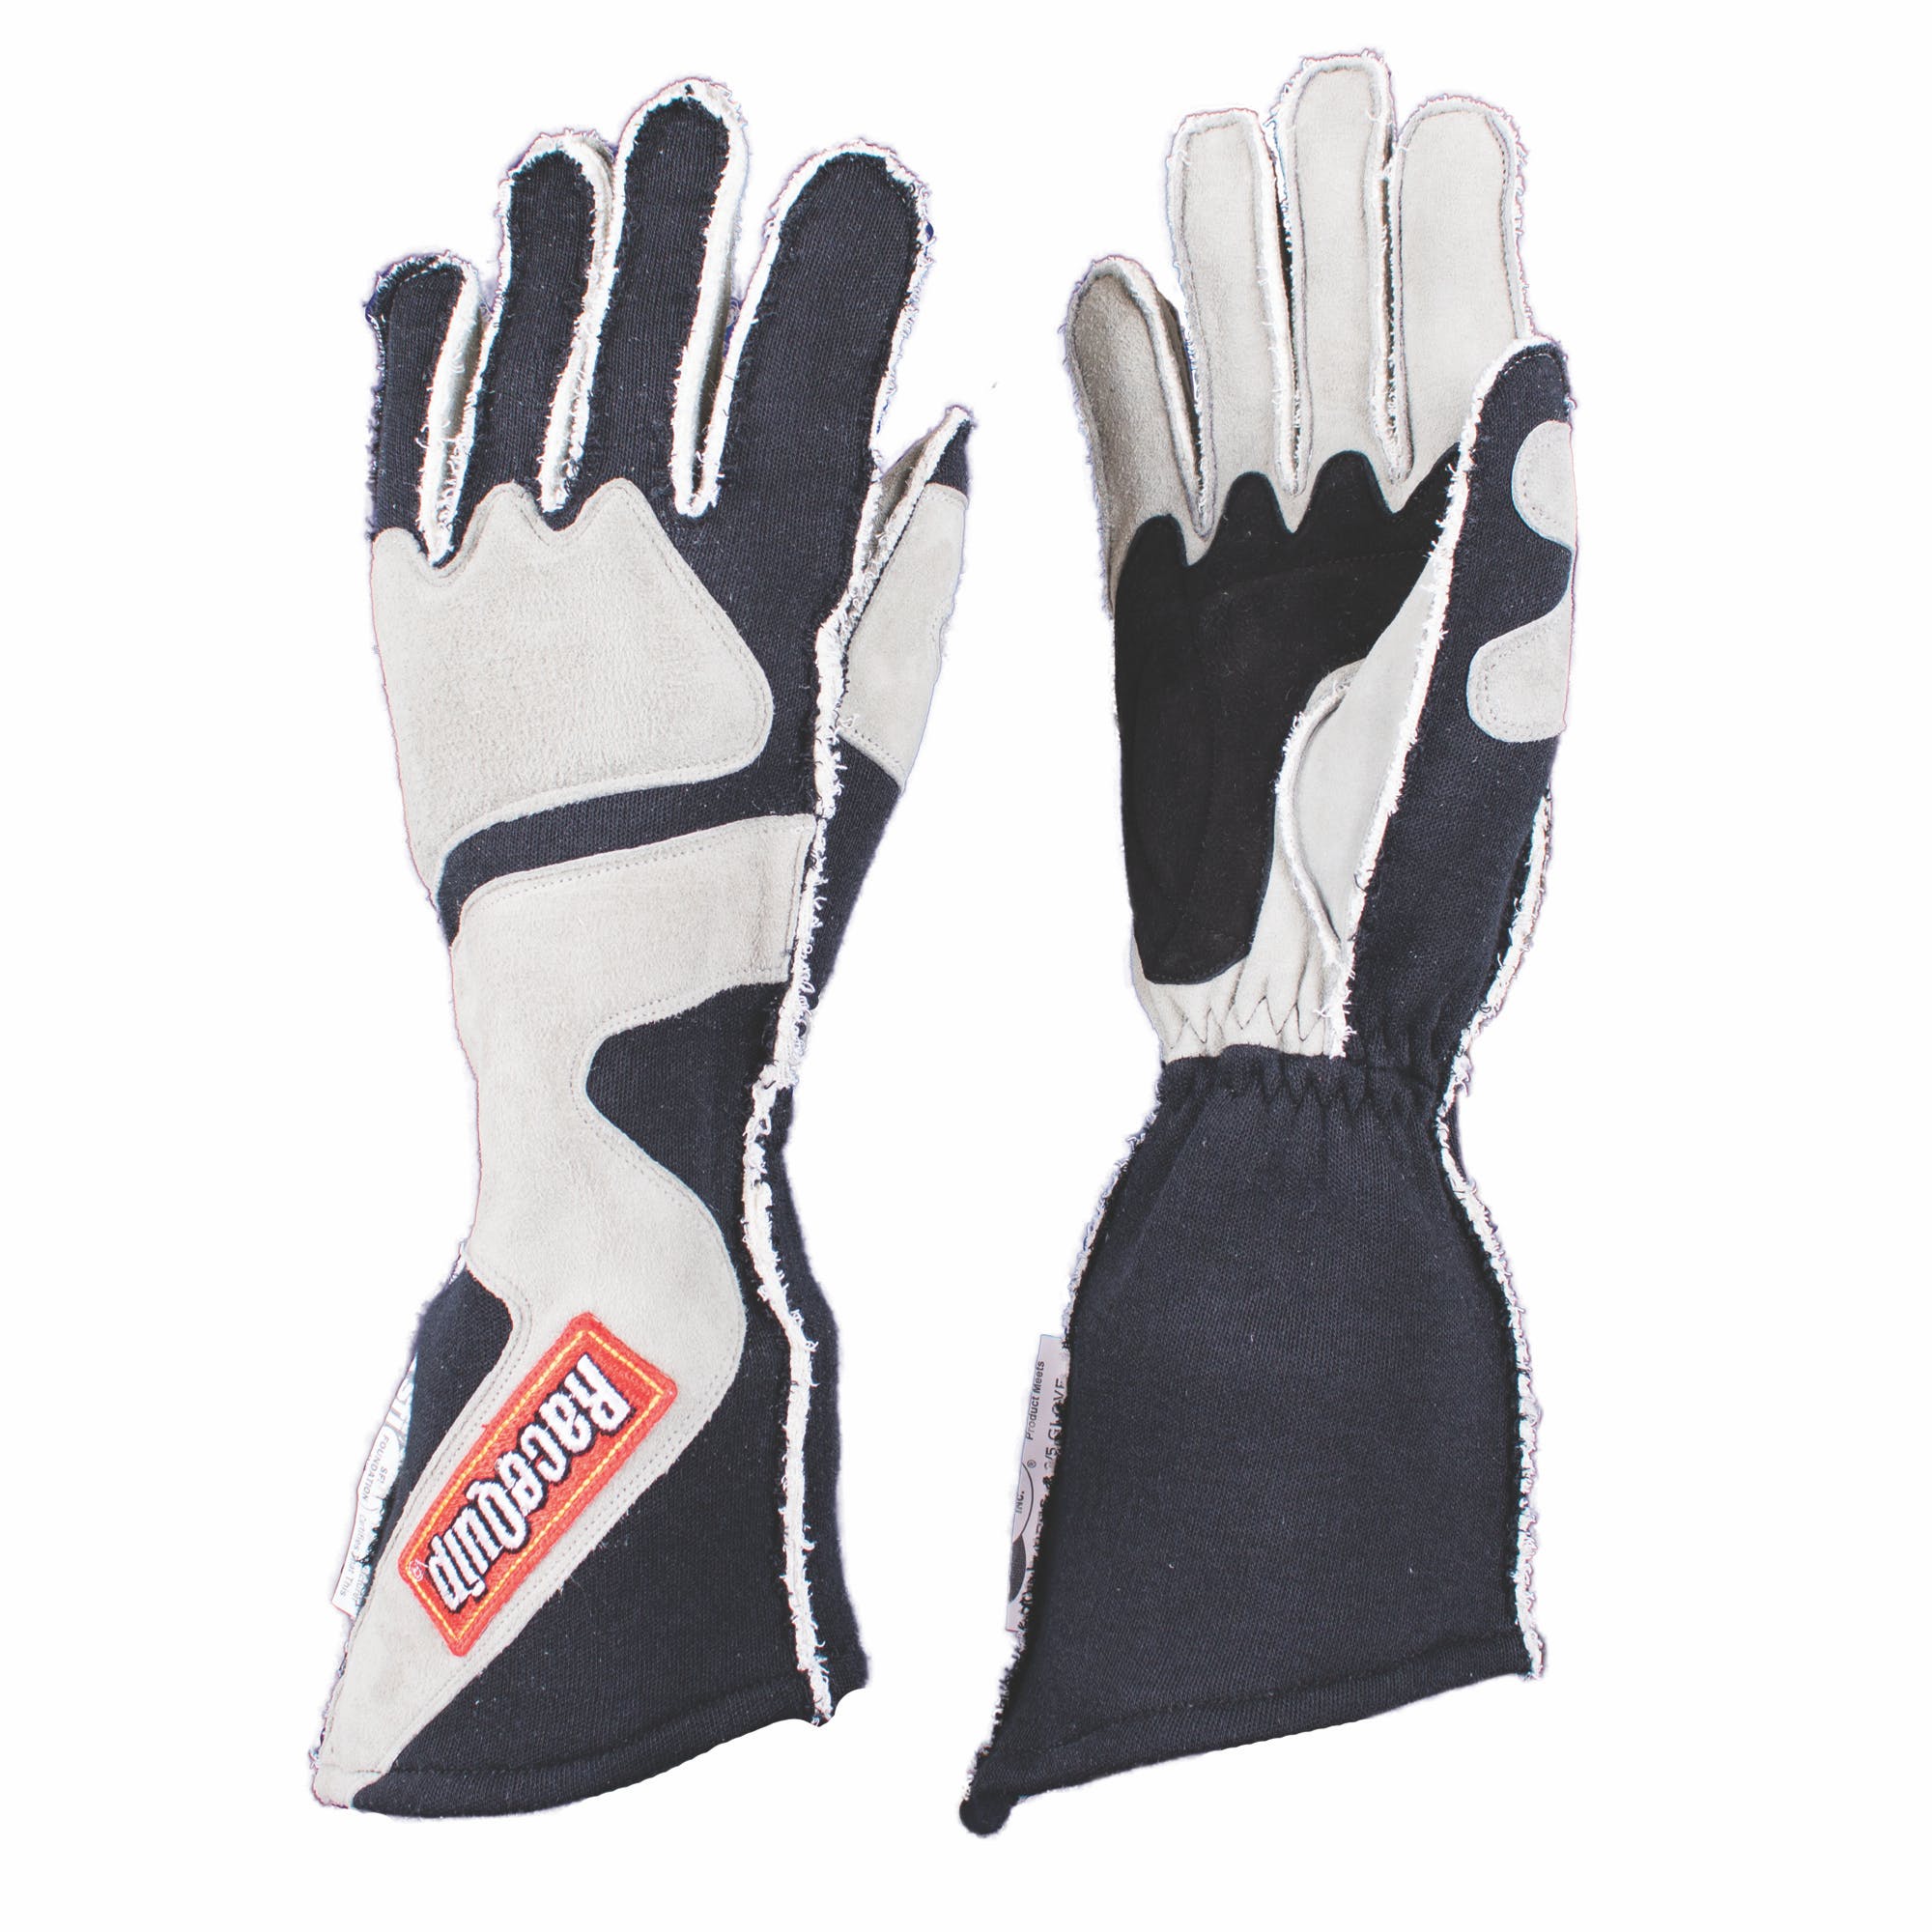 RaceQuip 359602 SFI-5 Out Seam Angle-Cut Gauntlet Racing Gloves (Gray/Black, Small)